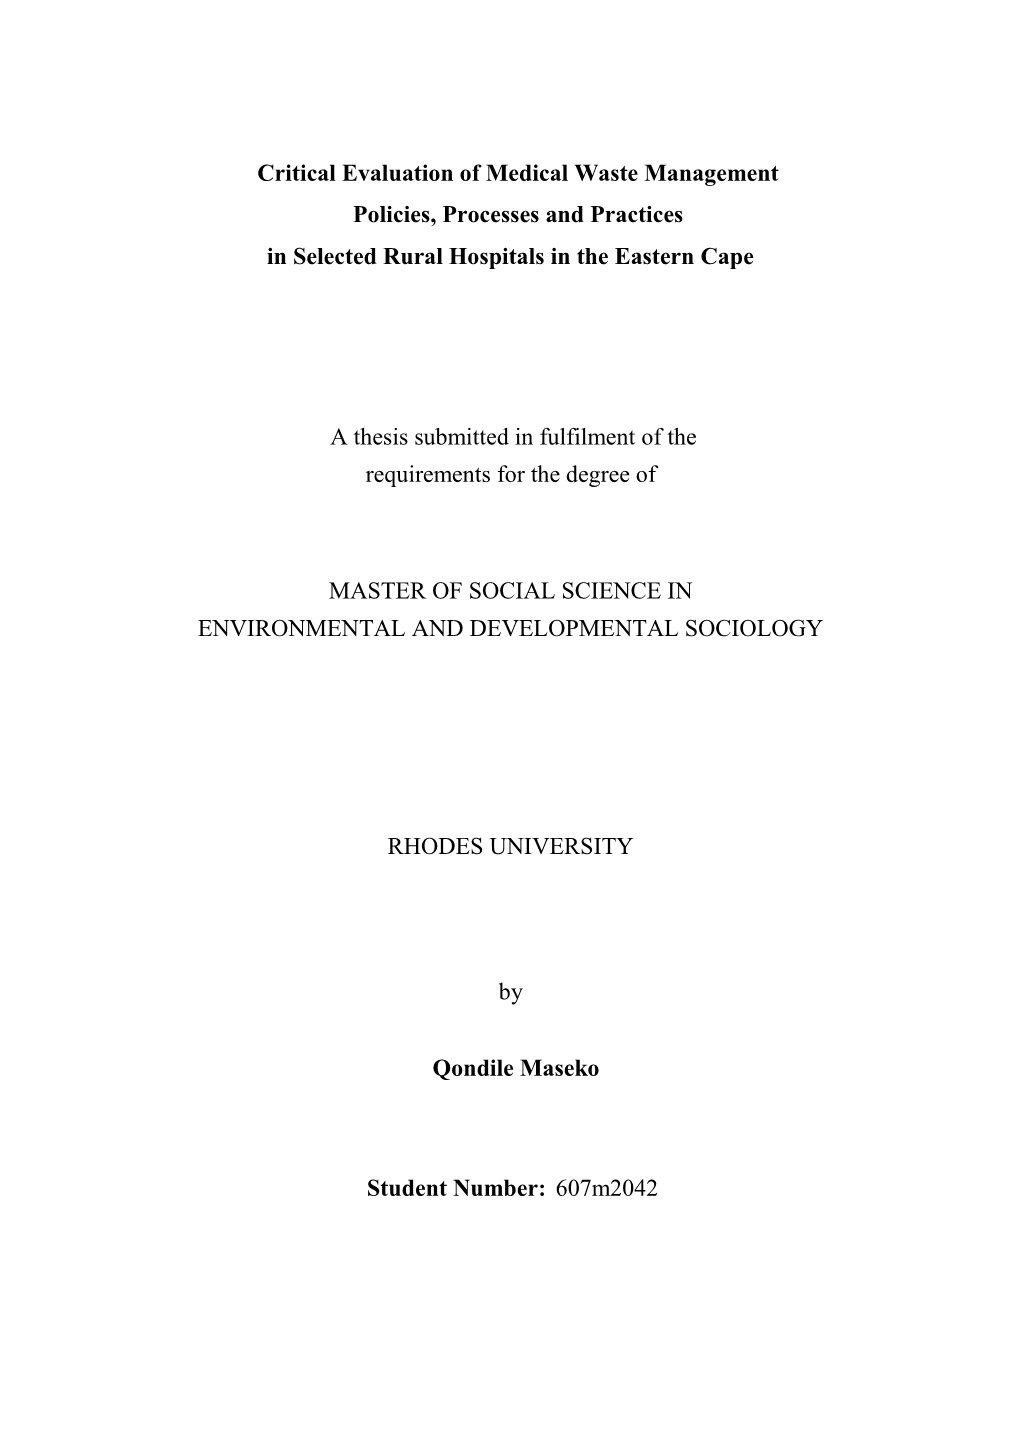 Critical Evaluation of Medical Waste Management Policies, Processes and Practices in Selected Rural Hospitals in the Eastern Cape